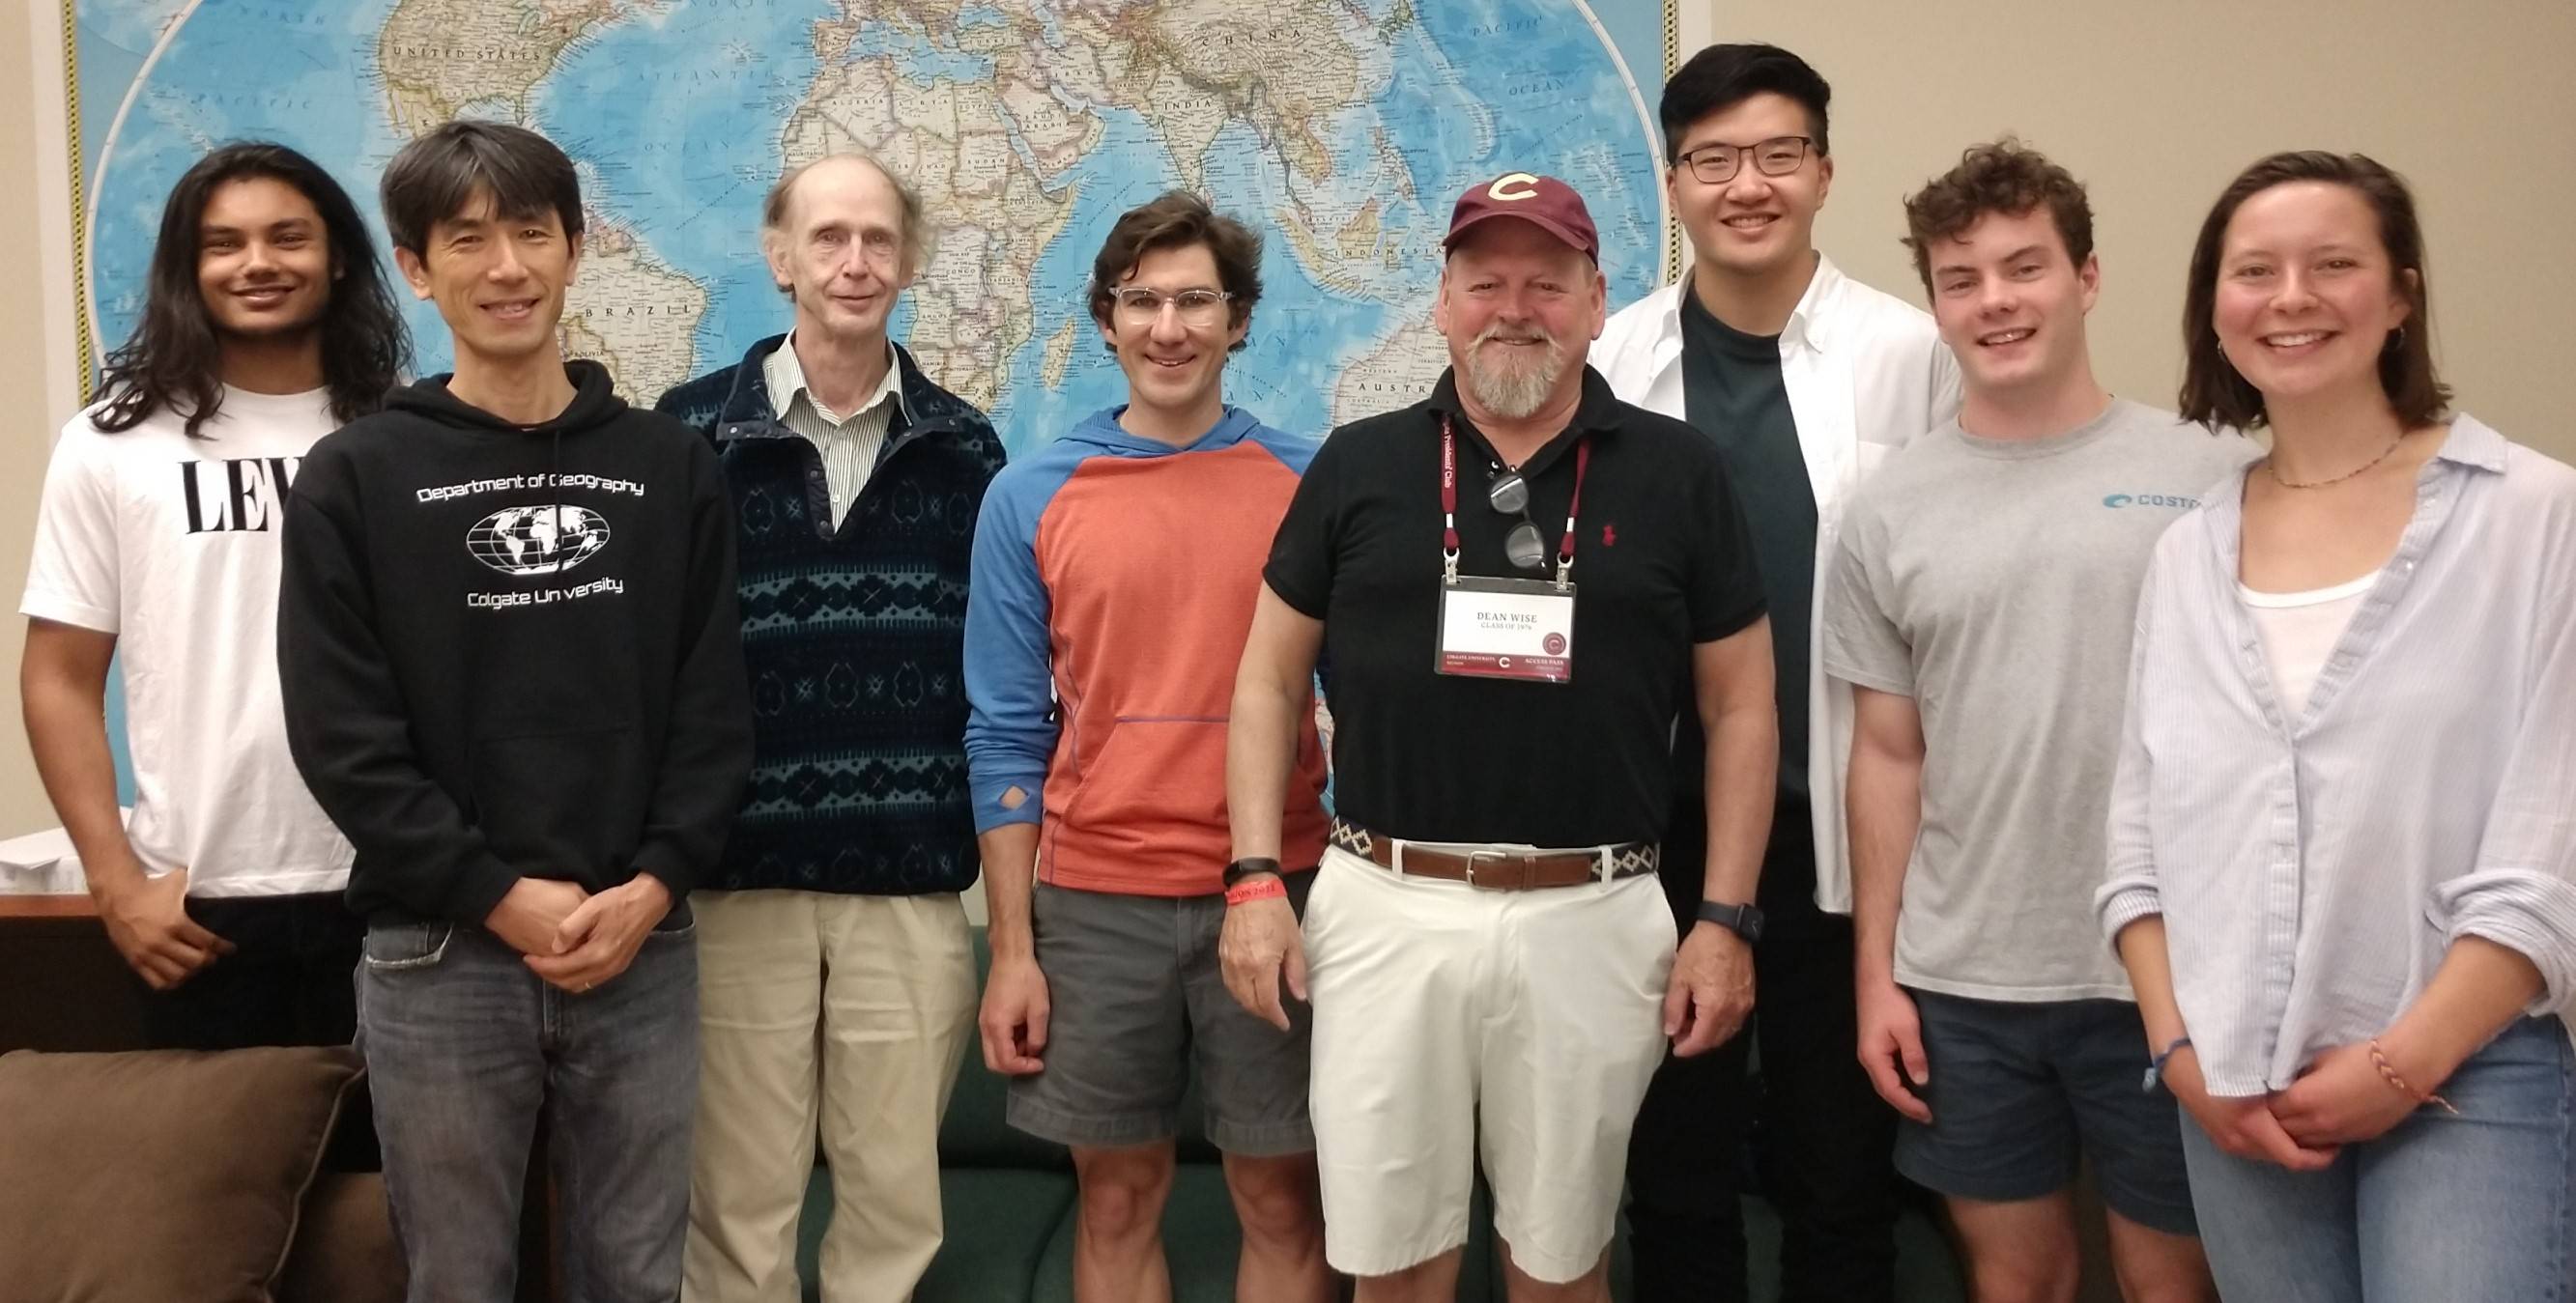 Dean Wise ’76 with Department of Geography summer research students. (Left to right) Aryaman Chobey ’25, Professor Daisaku Yamamoto, Professor Bill Meyer, Professor Mike Loranty, Dean Wise ’76, Tingkuan Hsieh ’24, Thomas Butler ’24, and Sophie Schadler ’23. 